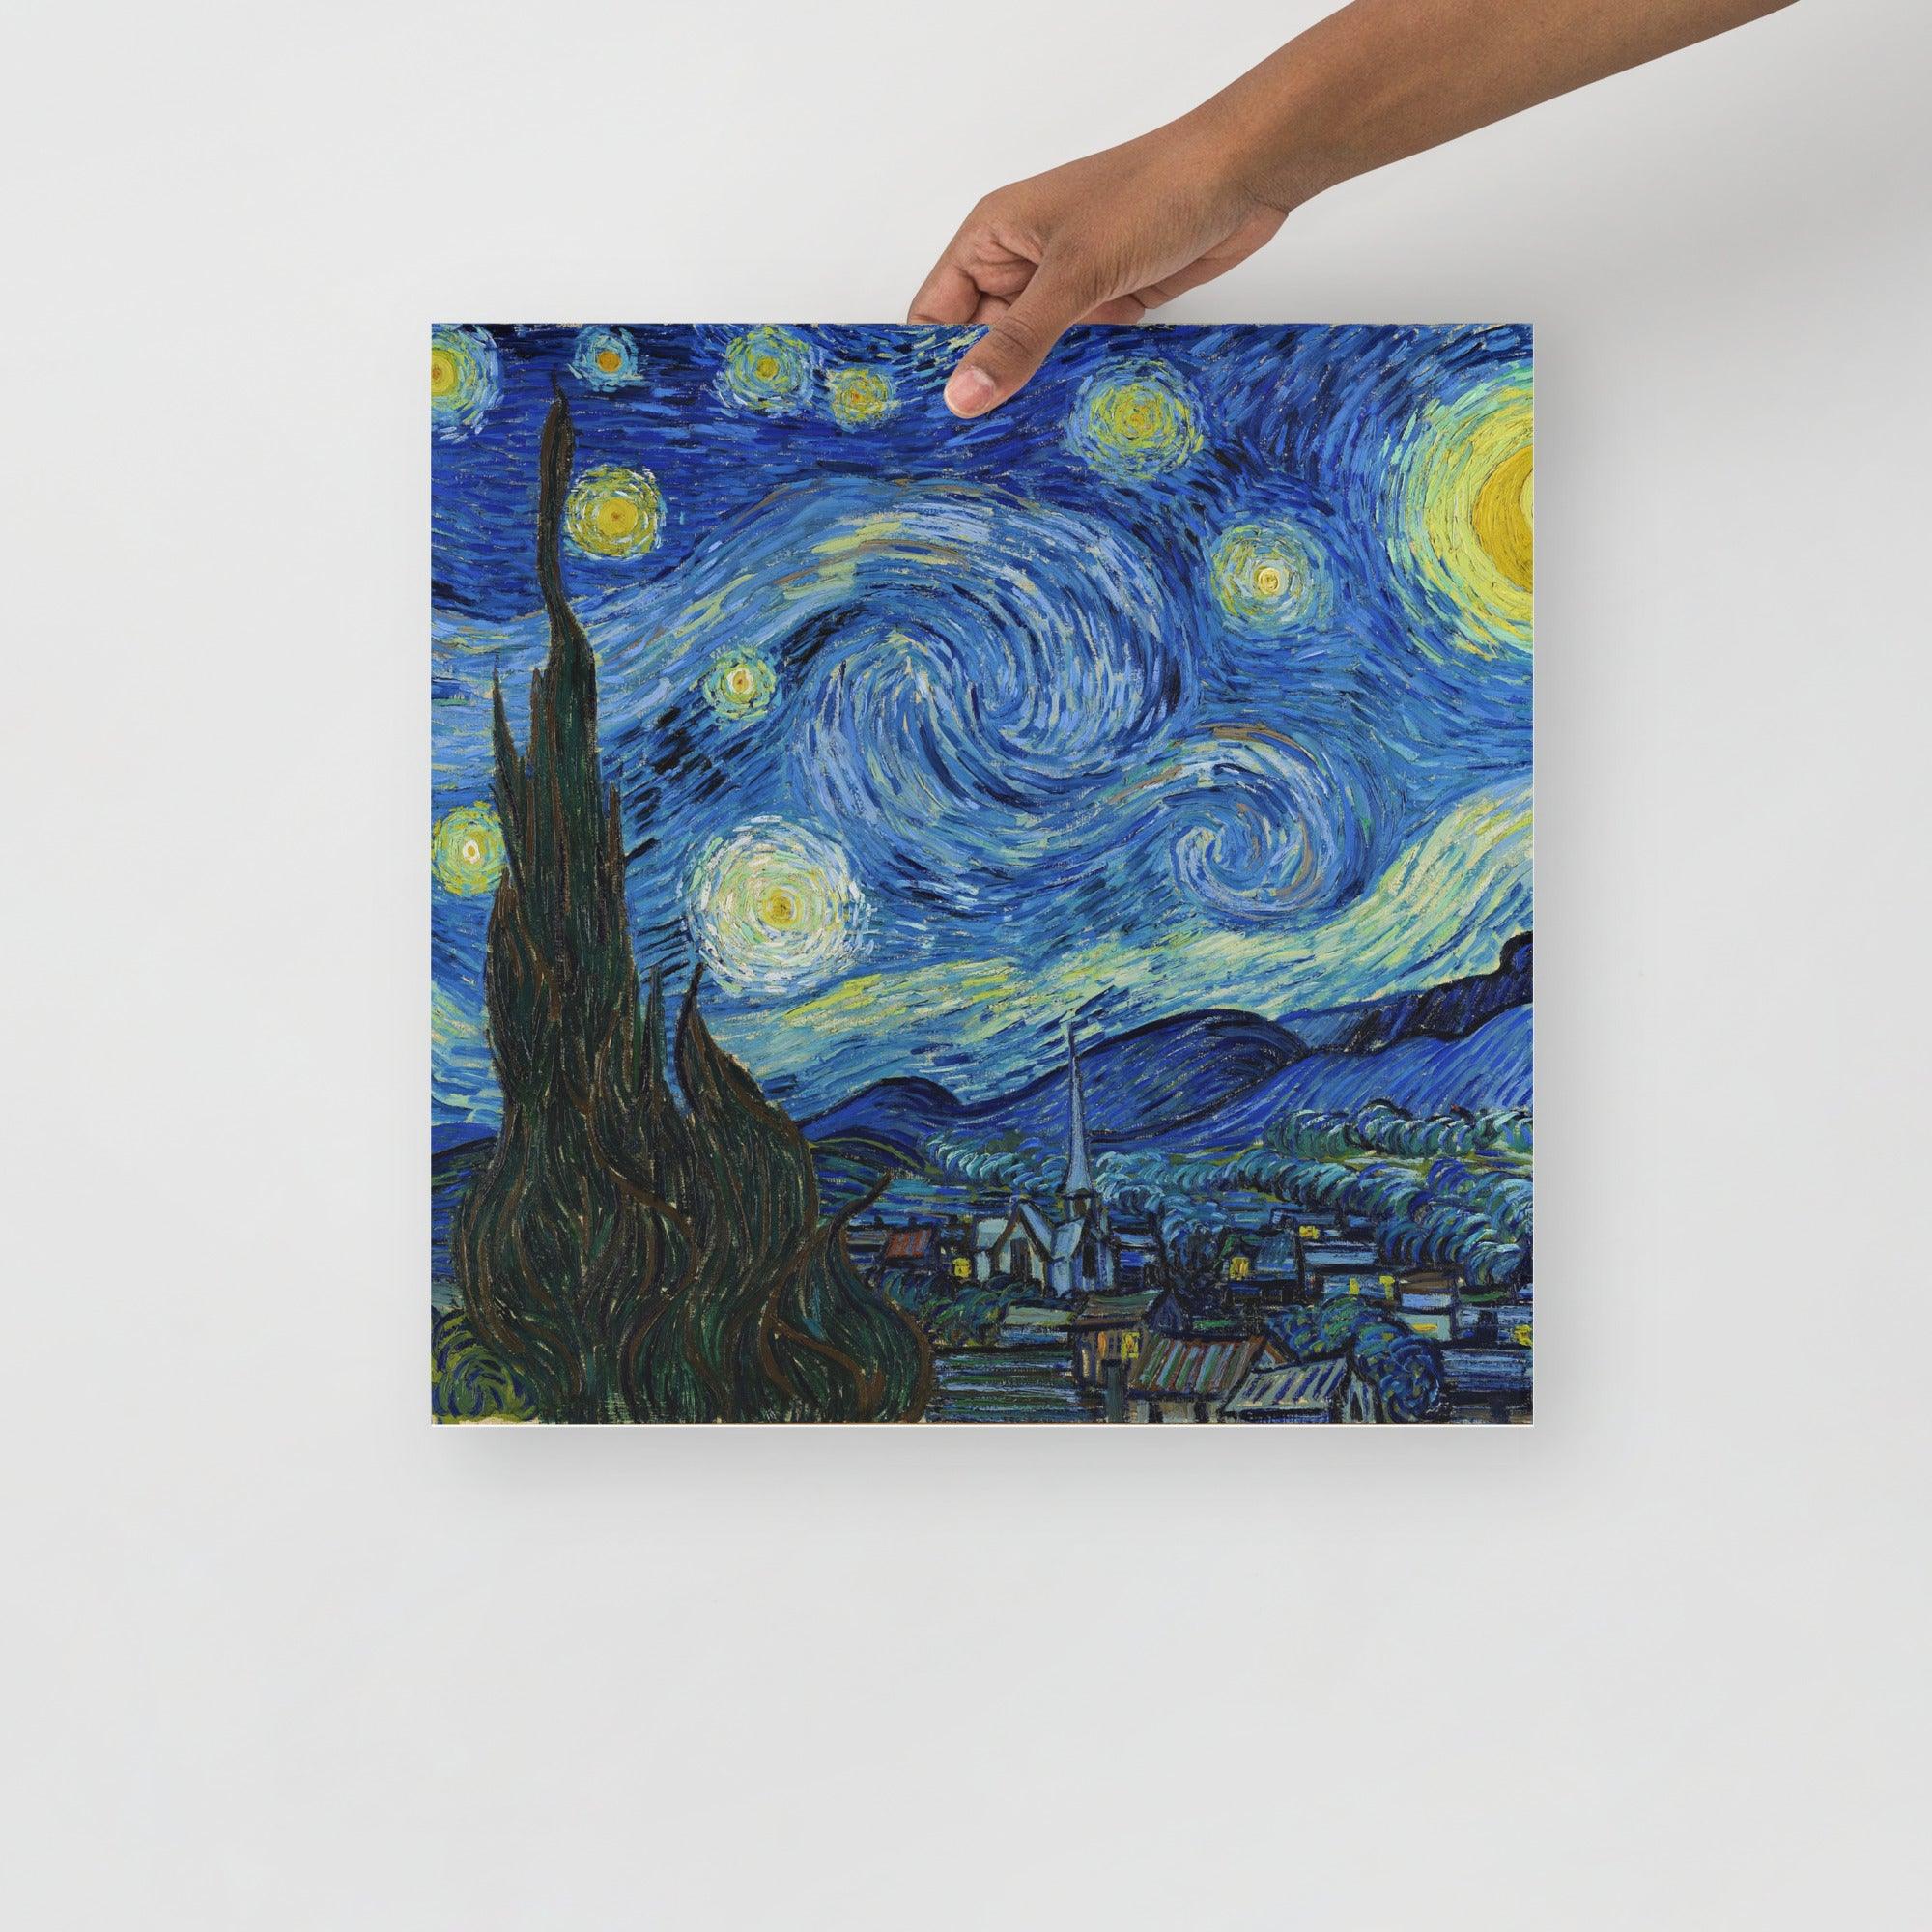 A The Starry Night by Vincent van Gogh poster on a plain backdrop in size 16x16”.